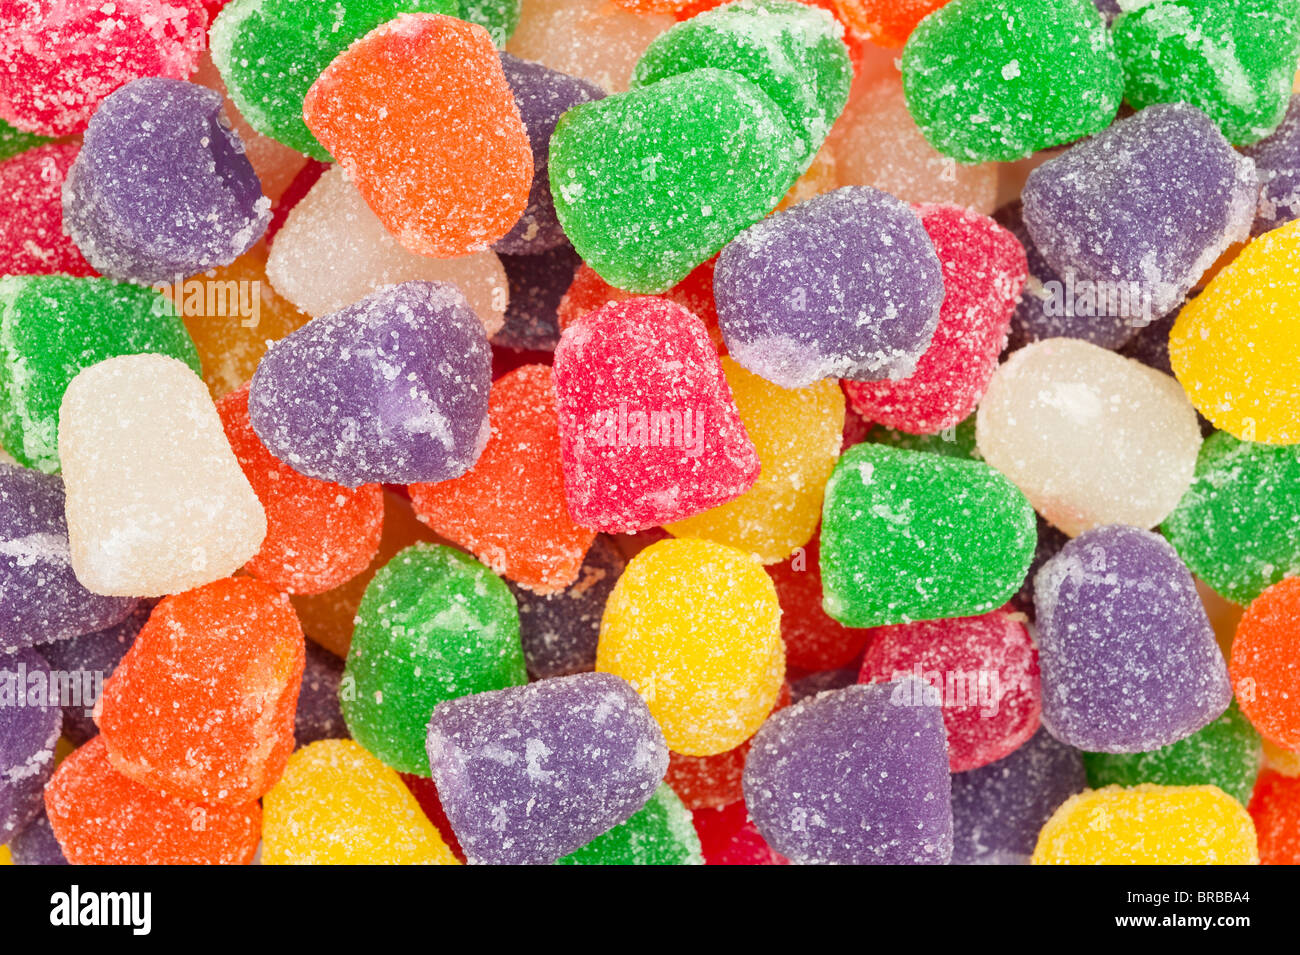 A pile of chewy, gummy, sugar crystalized sweet holiday candy. Stock Photo